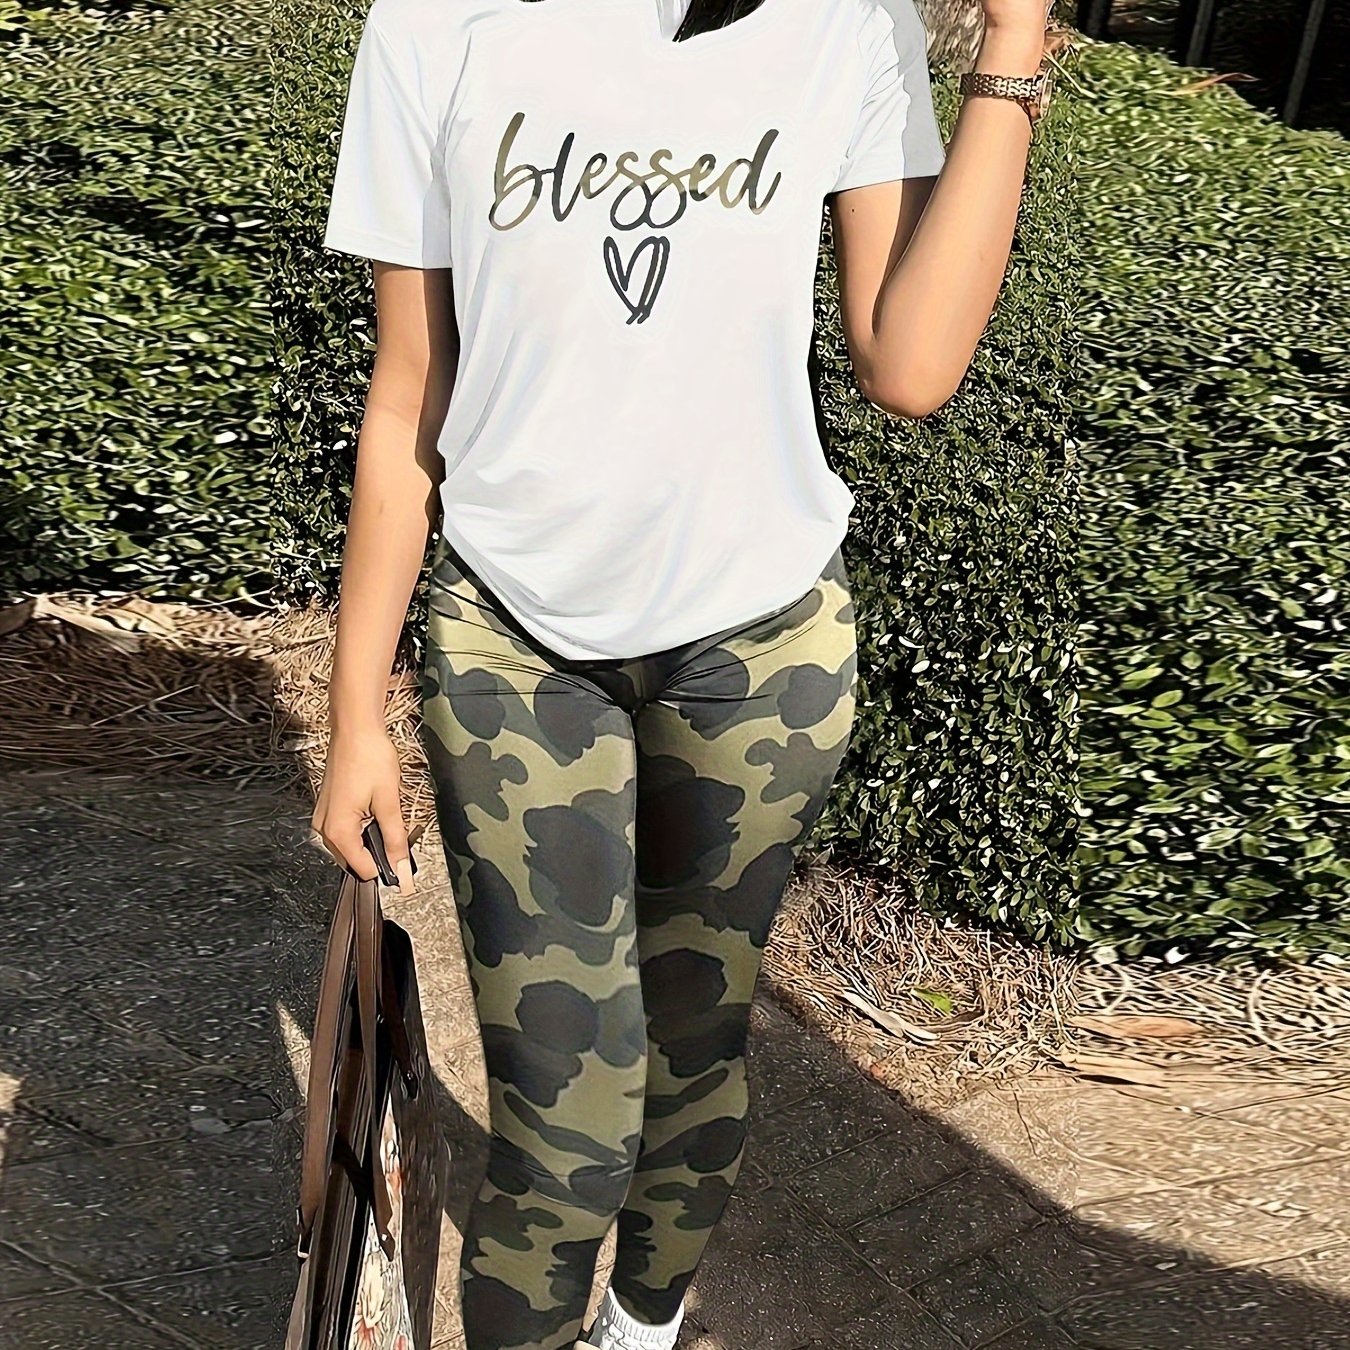 Blessed (camouflage) Women's Christian Casual Outfit claimedbygoddesigns